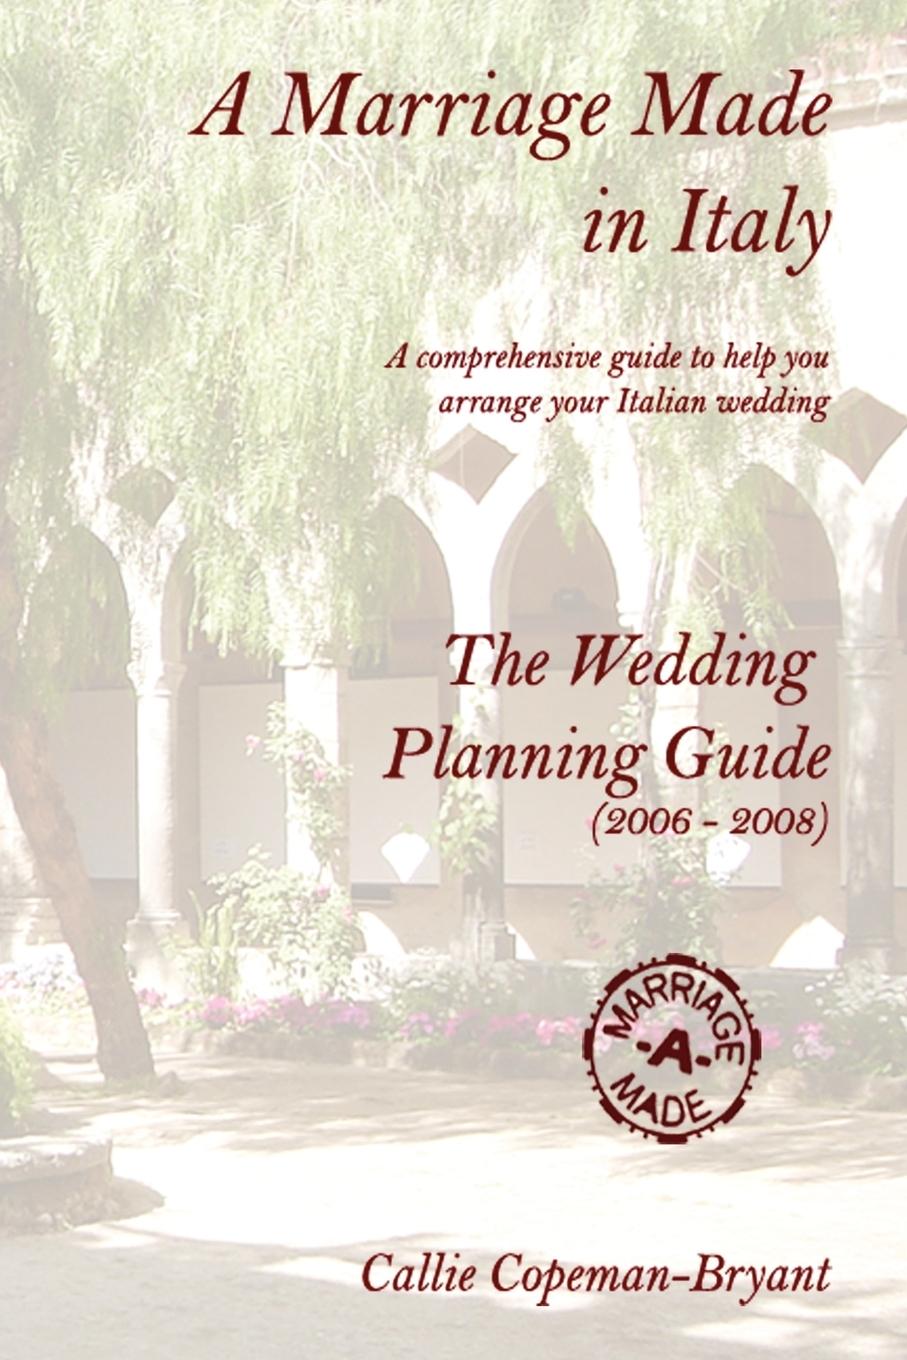 A Marriage Made in Italy - The Wedding Planning Guide (2006 - 2008) - Copeman-Bryant, Callie